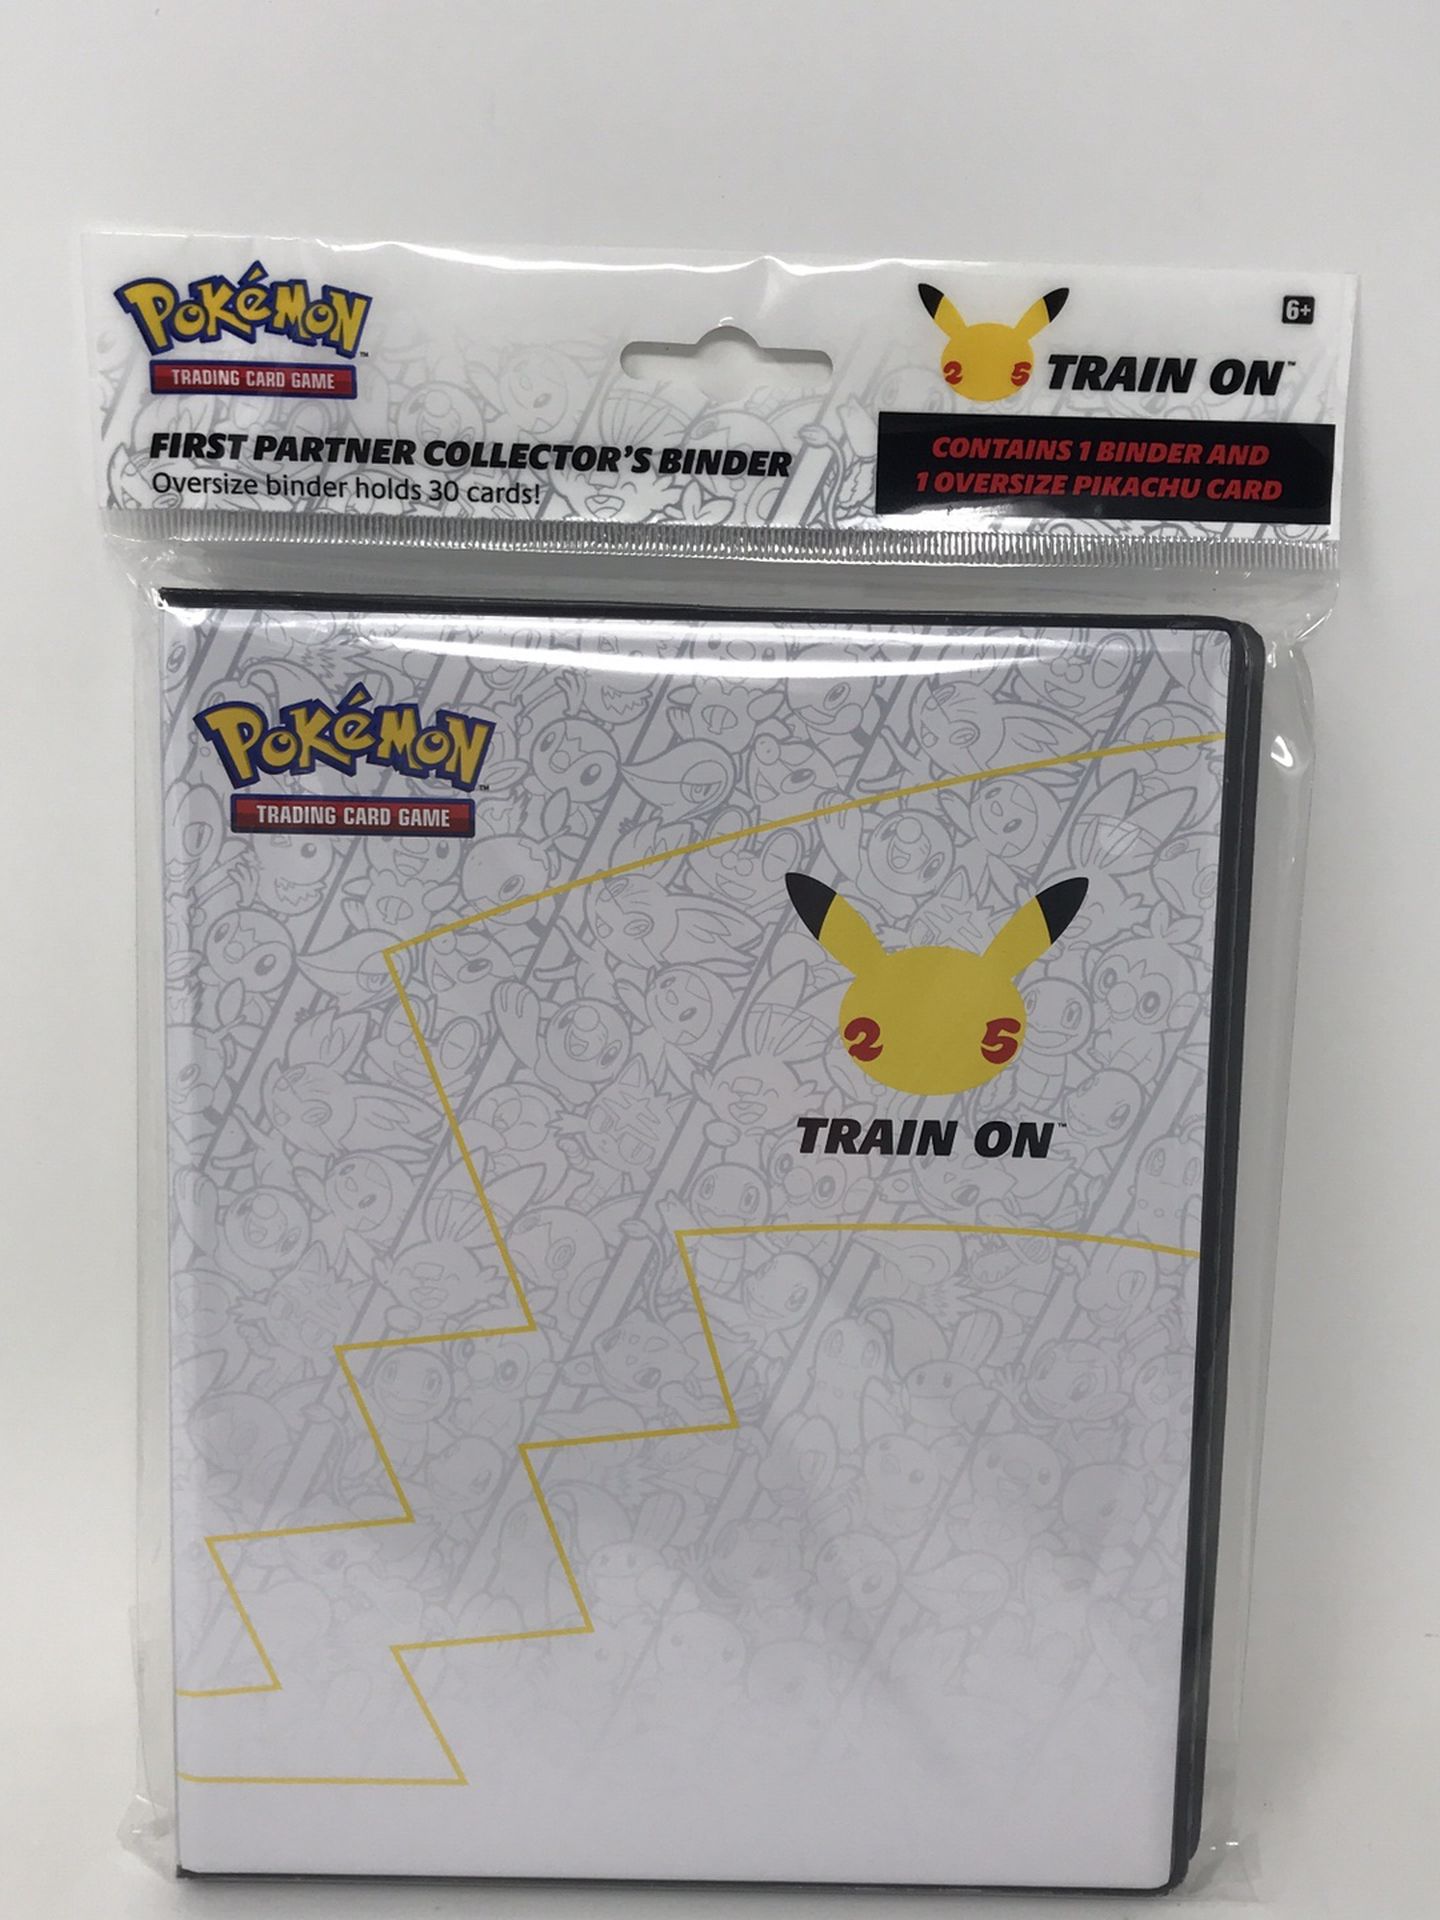 Pokemon 25th Anniversary Collectors Binder for Trading Cards